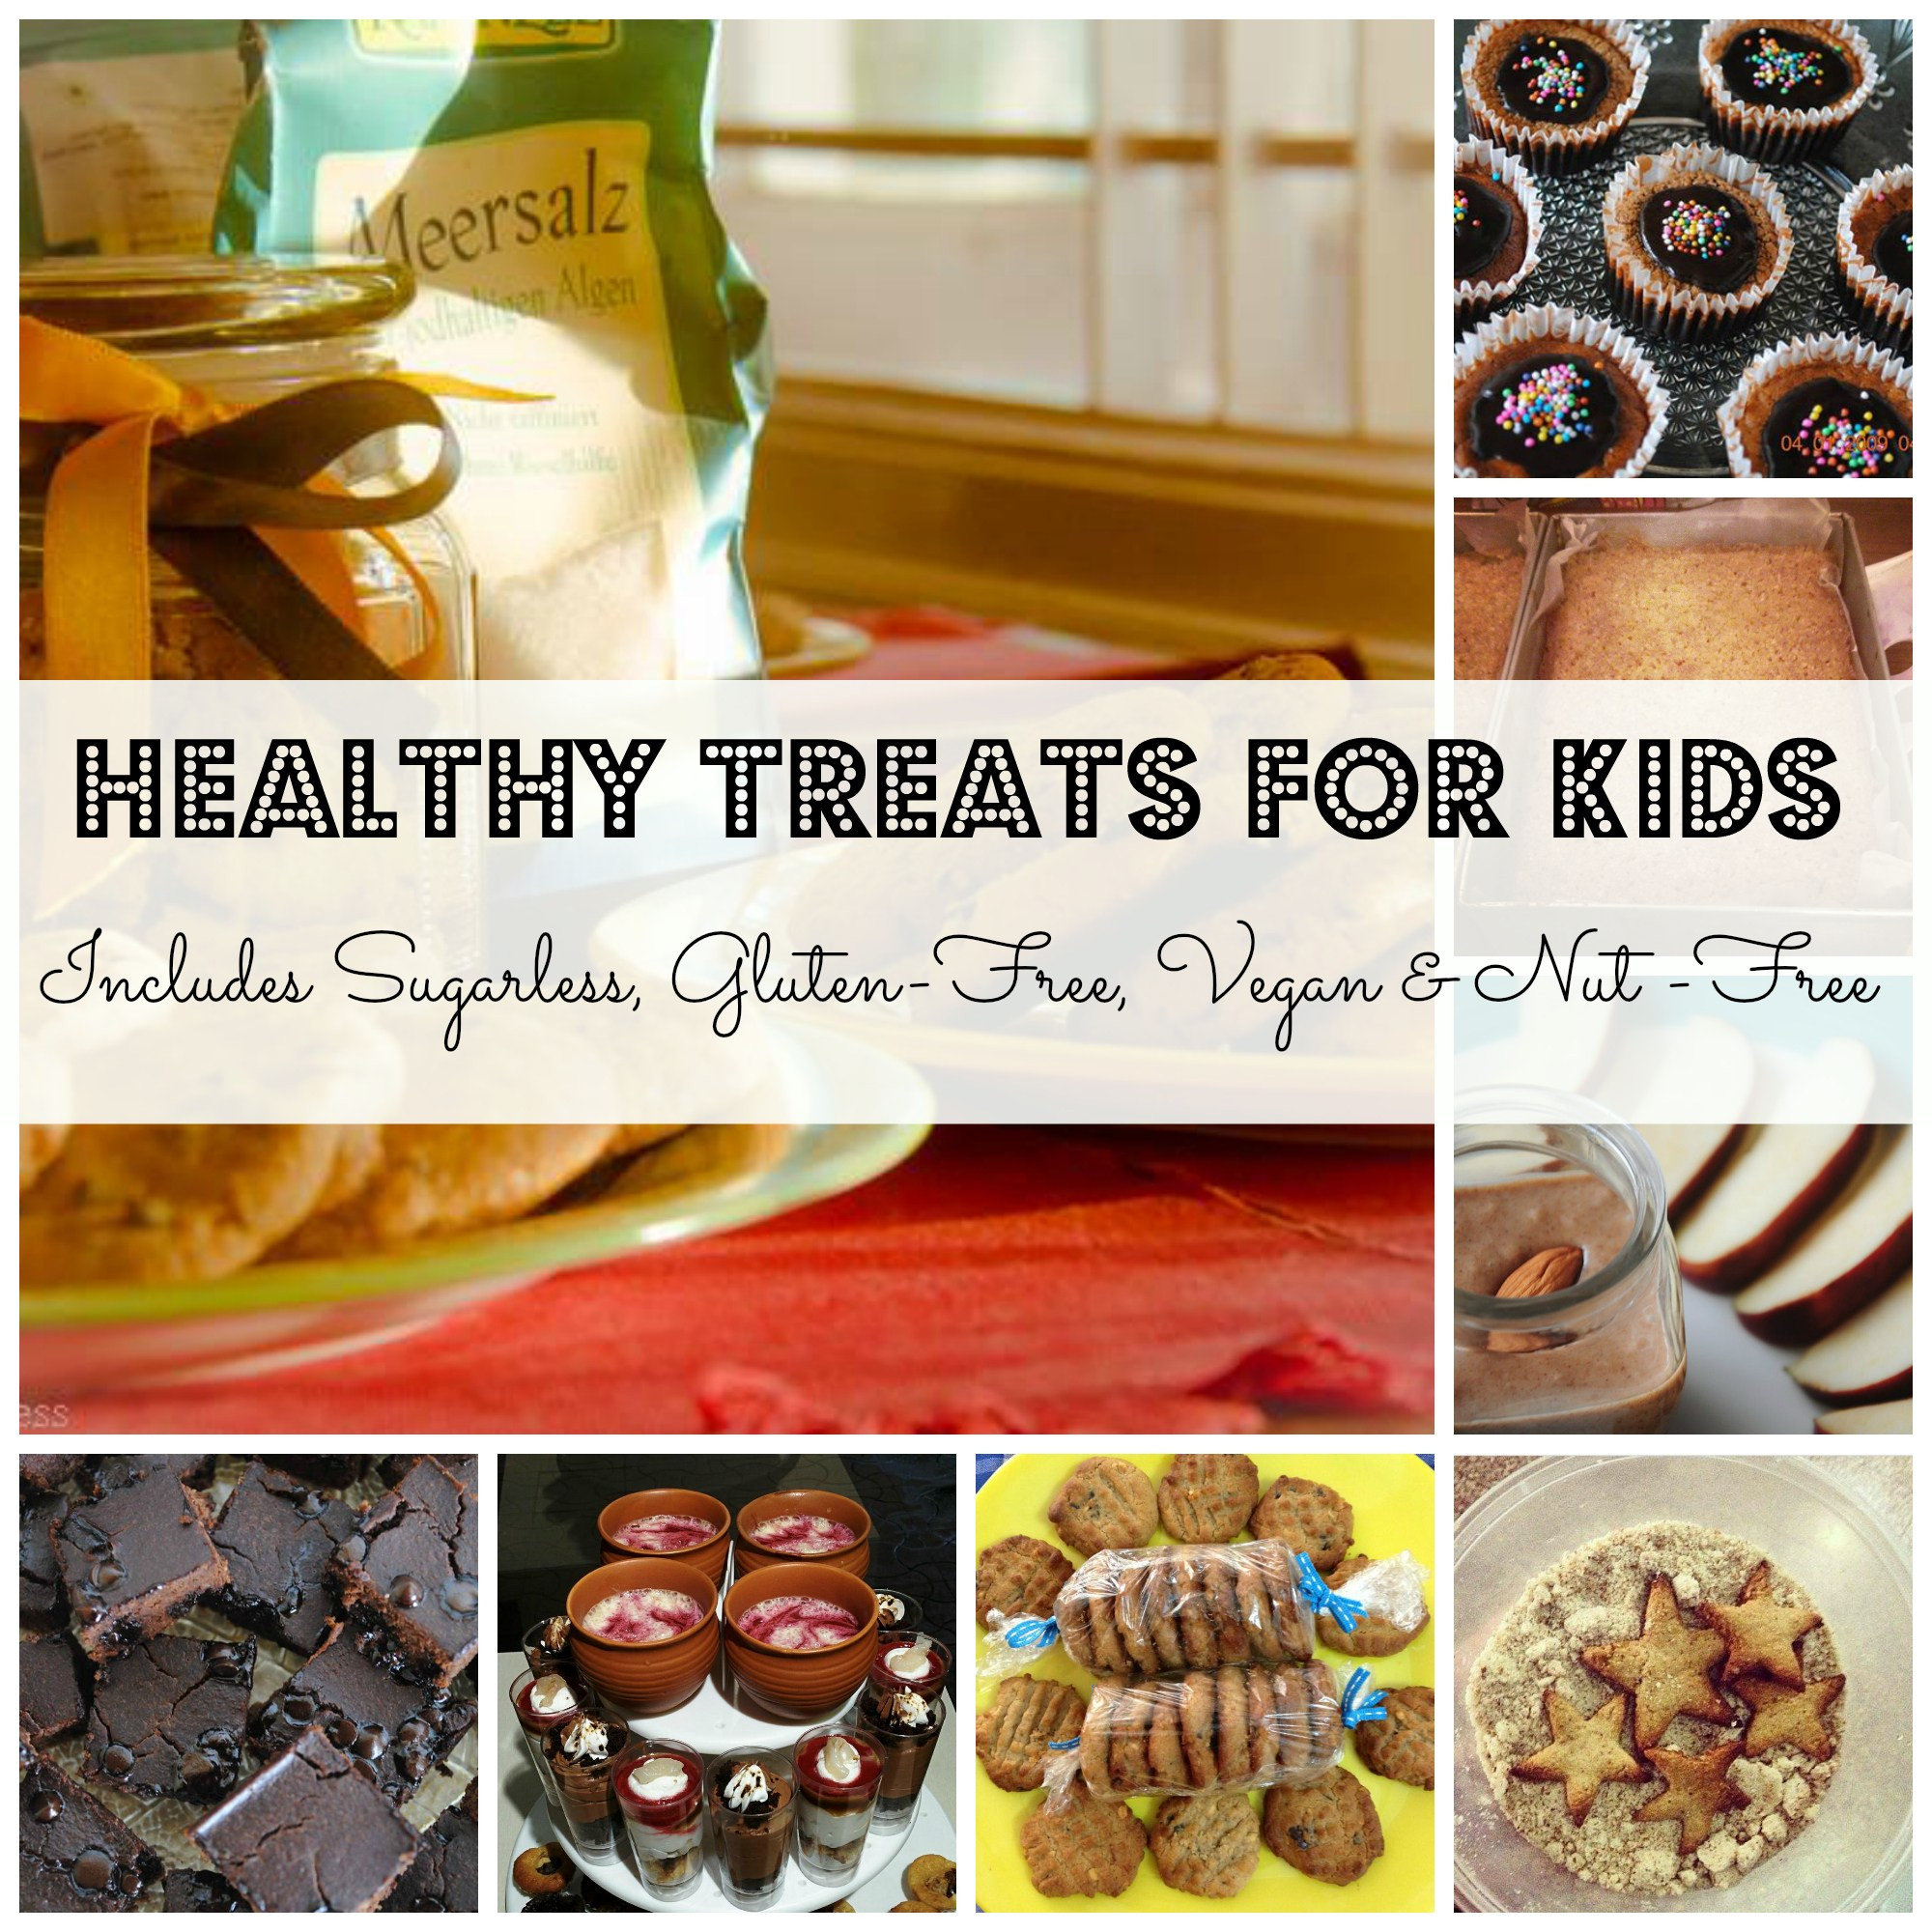 Dairy Free Desserts For Kids
 Healthy vegan gluten free and nut free treats for kids in